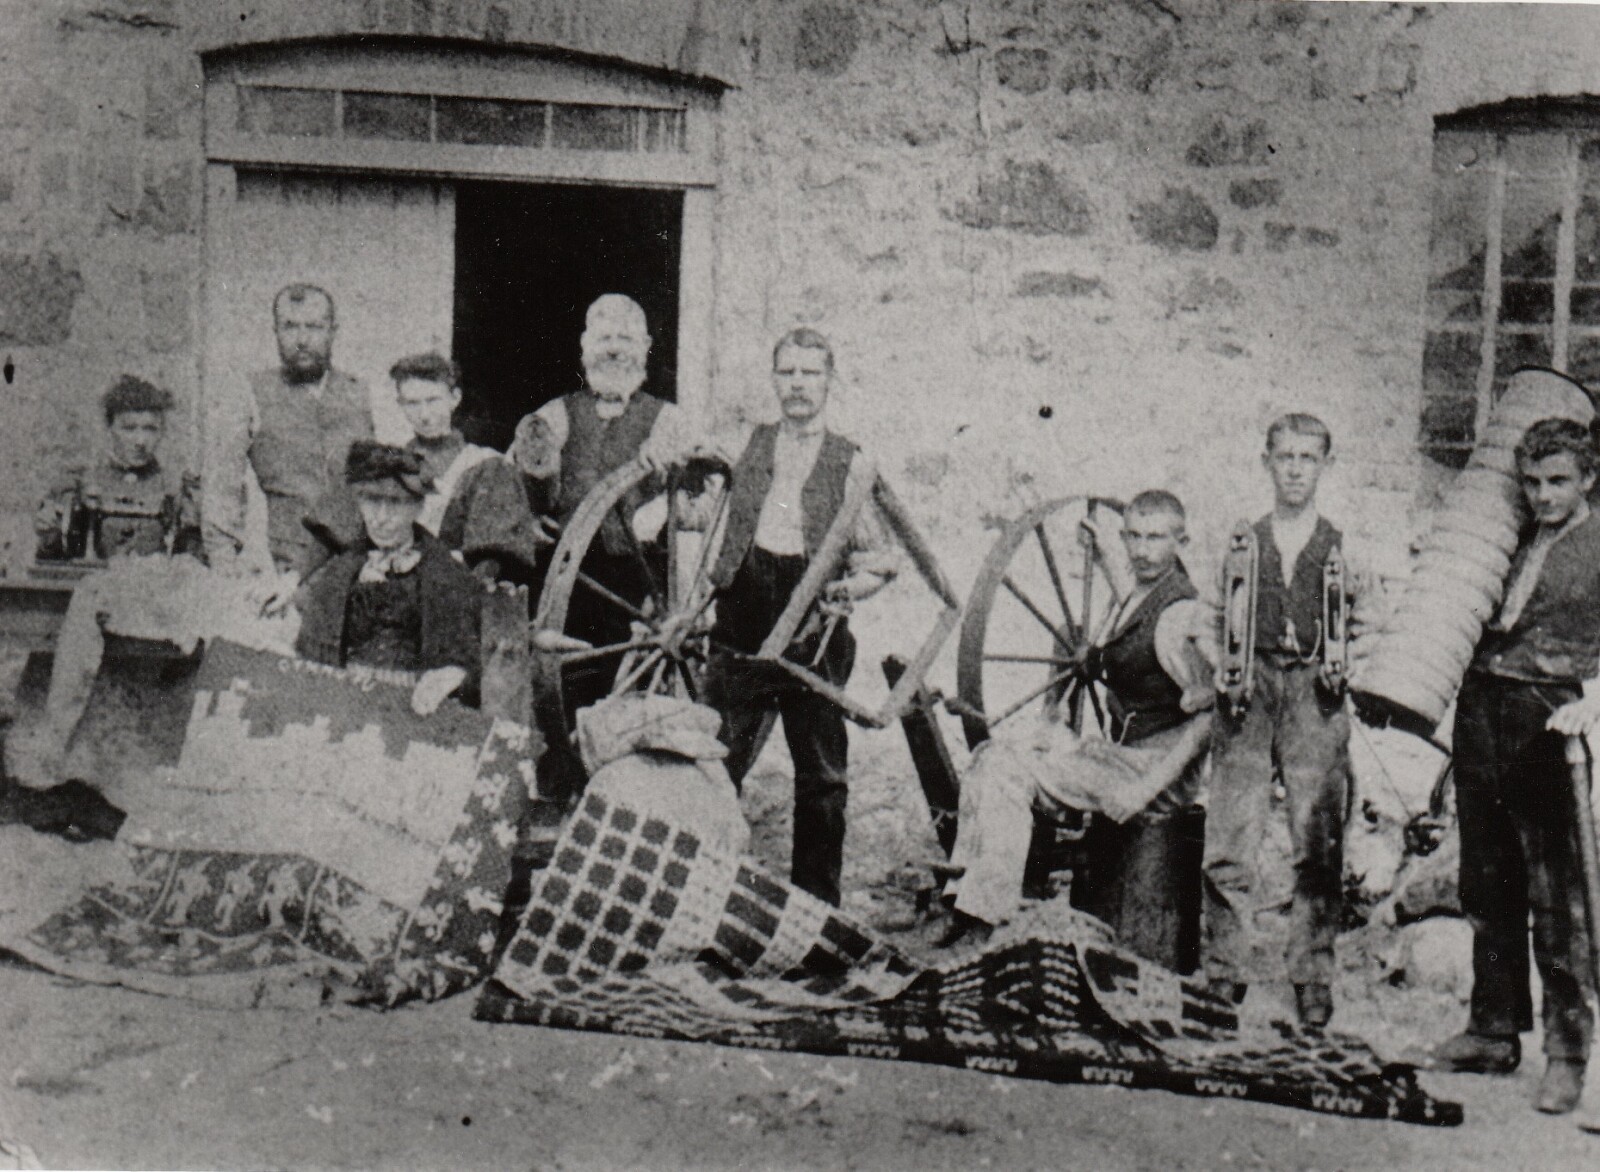 Black and white photograph showing nine workers outside Pwllheli Woollen Mill with blankets, spinning wheels and tools of their trade